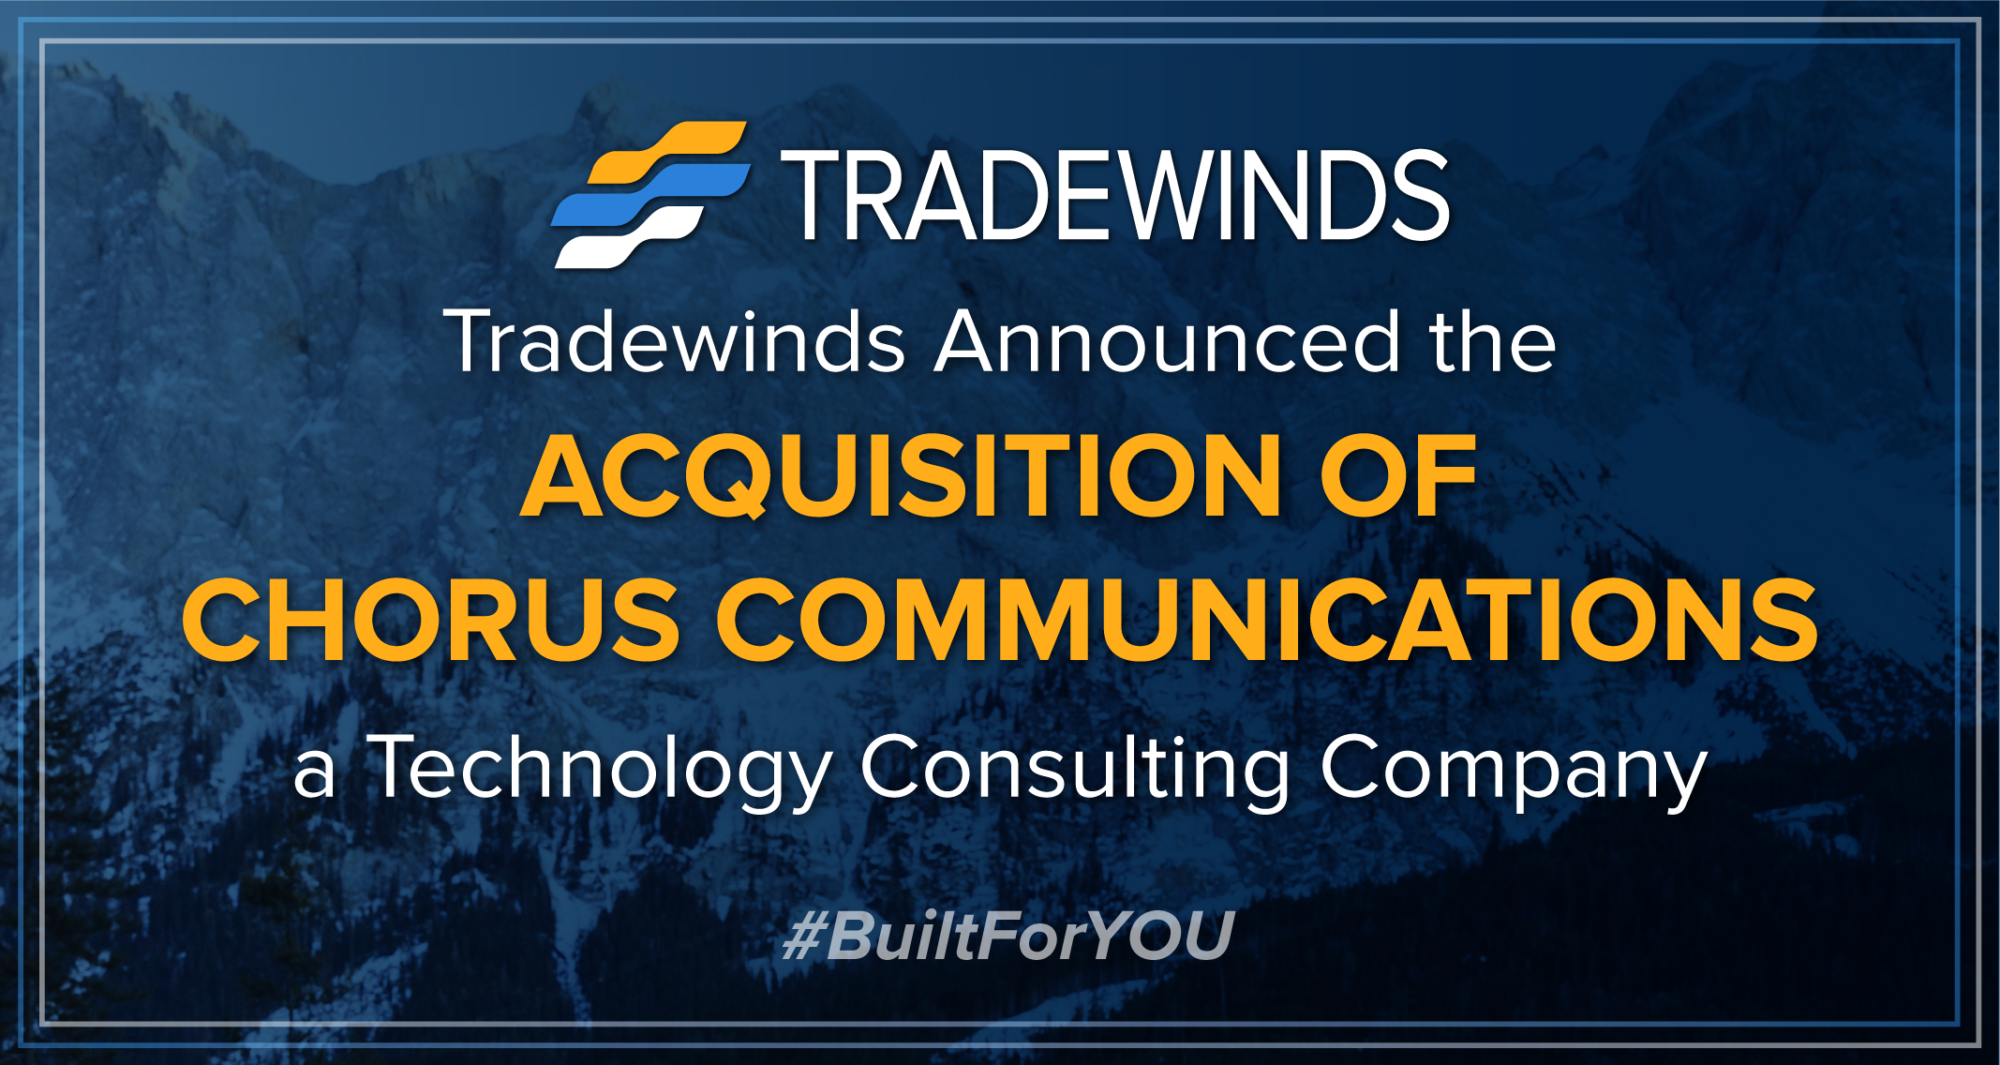 Acquisition of Chorus Communications, a Technology Consulting Company